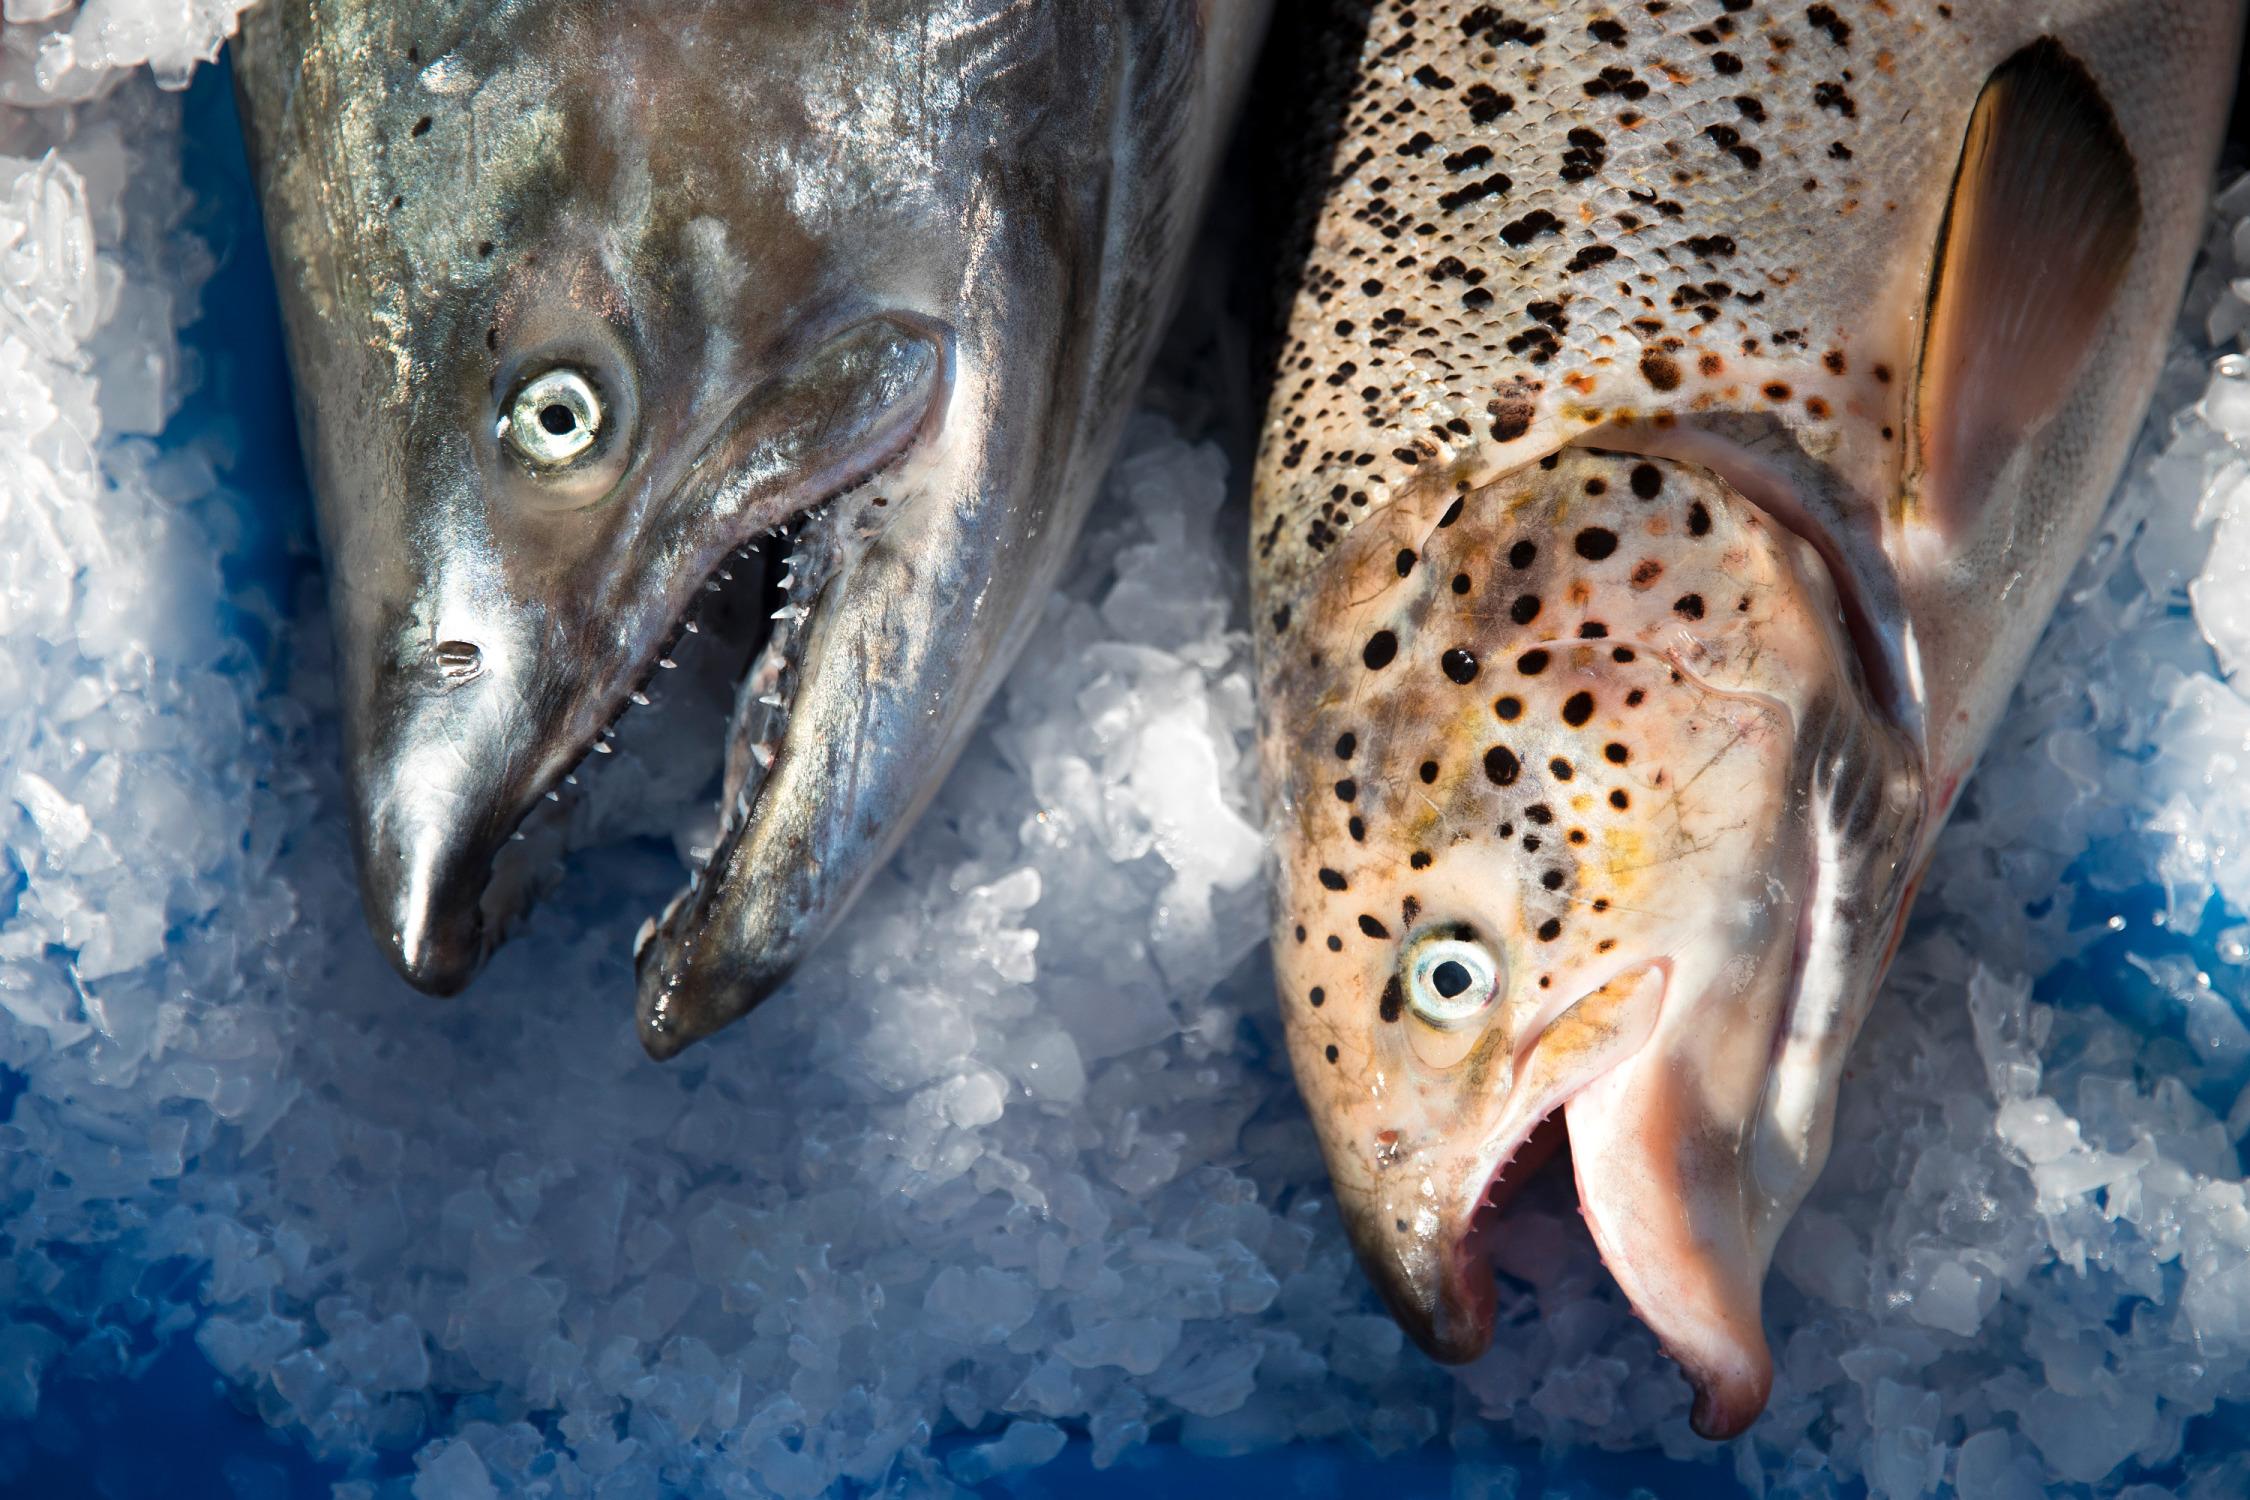 Can Fugitive Atlantic Salmon Survive In The Wild? - OPB